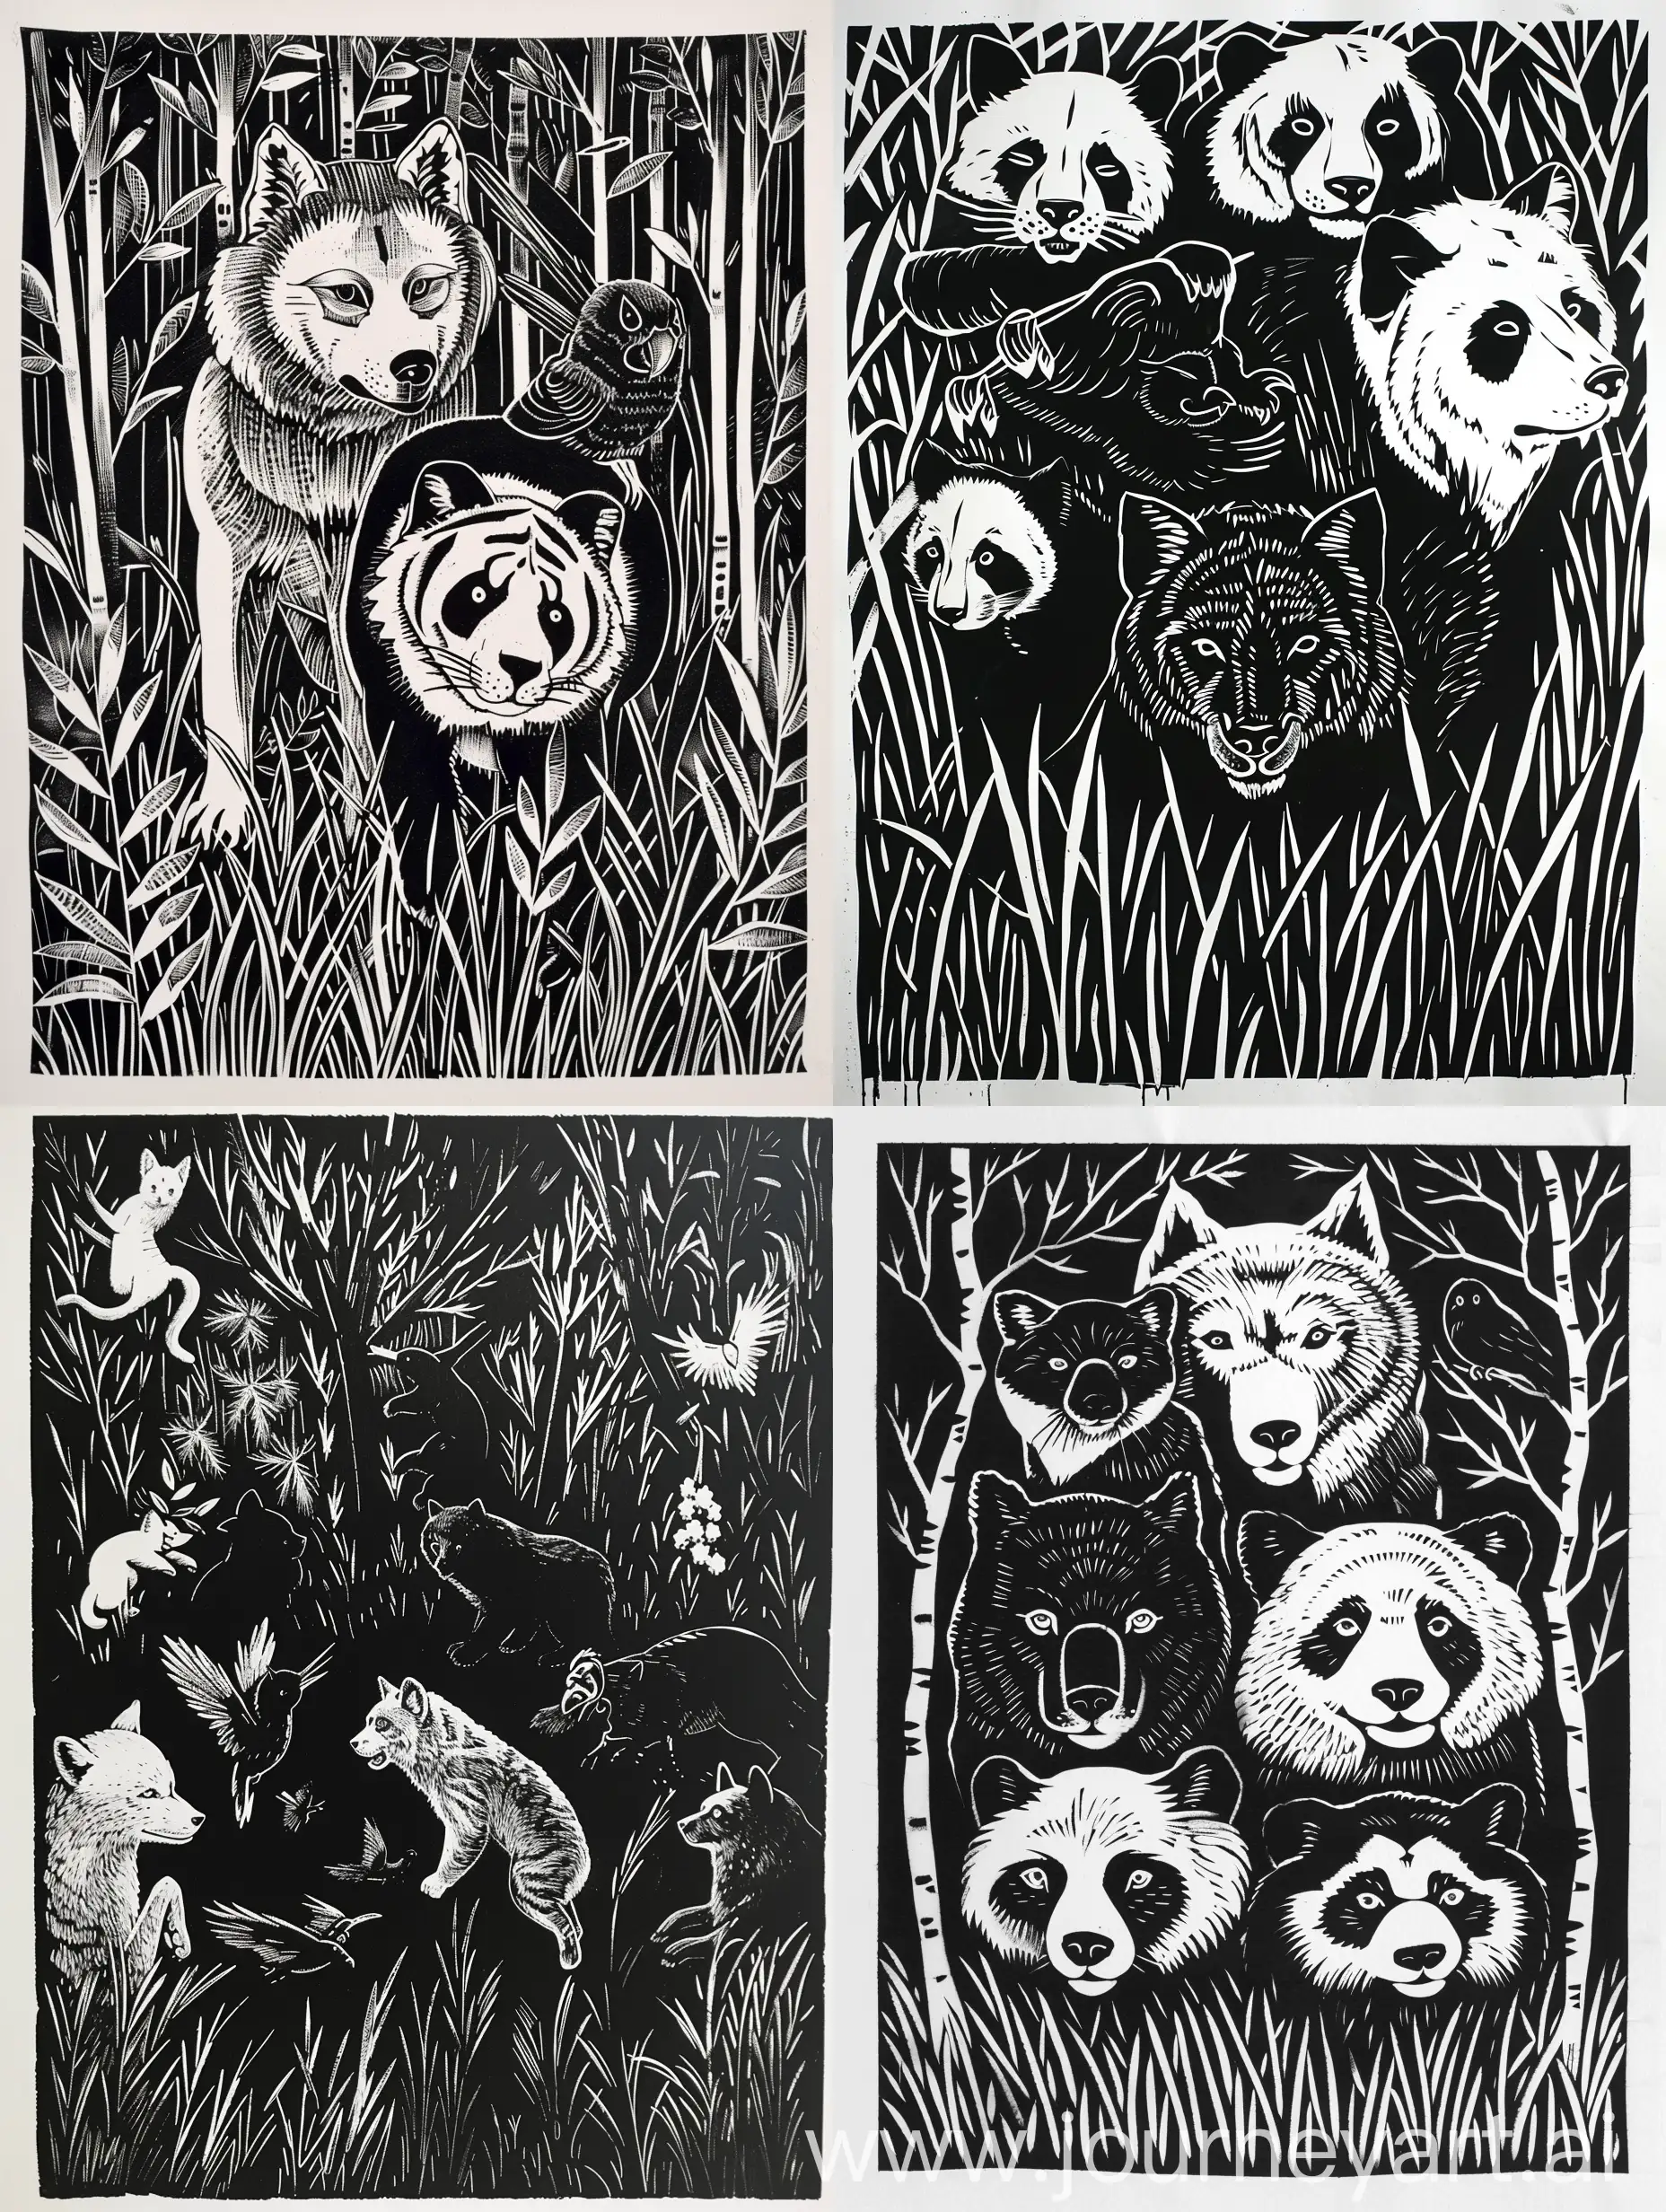 This is a series of black and white woodcut prints with themes of wolves, tigers, cats, parrots, and pandas. Each artwork is required to have a background mainly of grass and trees, and diverse knife techniques and language. The overall use of various knife techniques and techniques to depict rich hierarchical changes, with clear processing intentions and harmonious changes in each image.